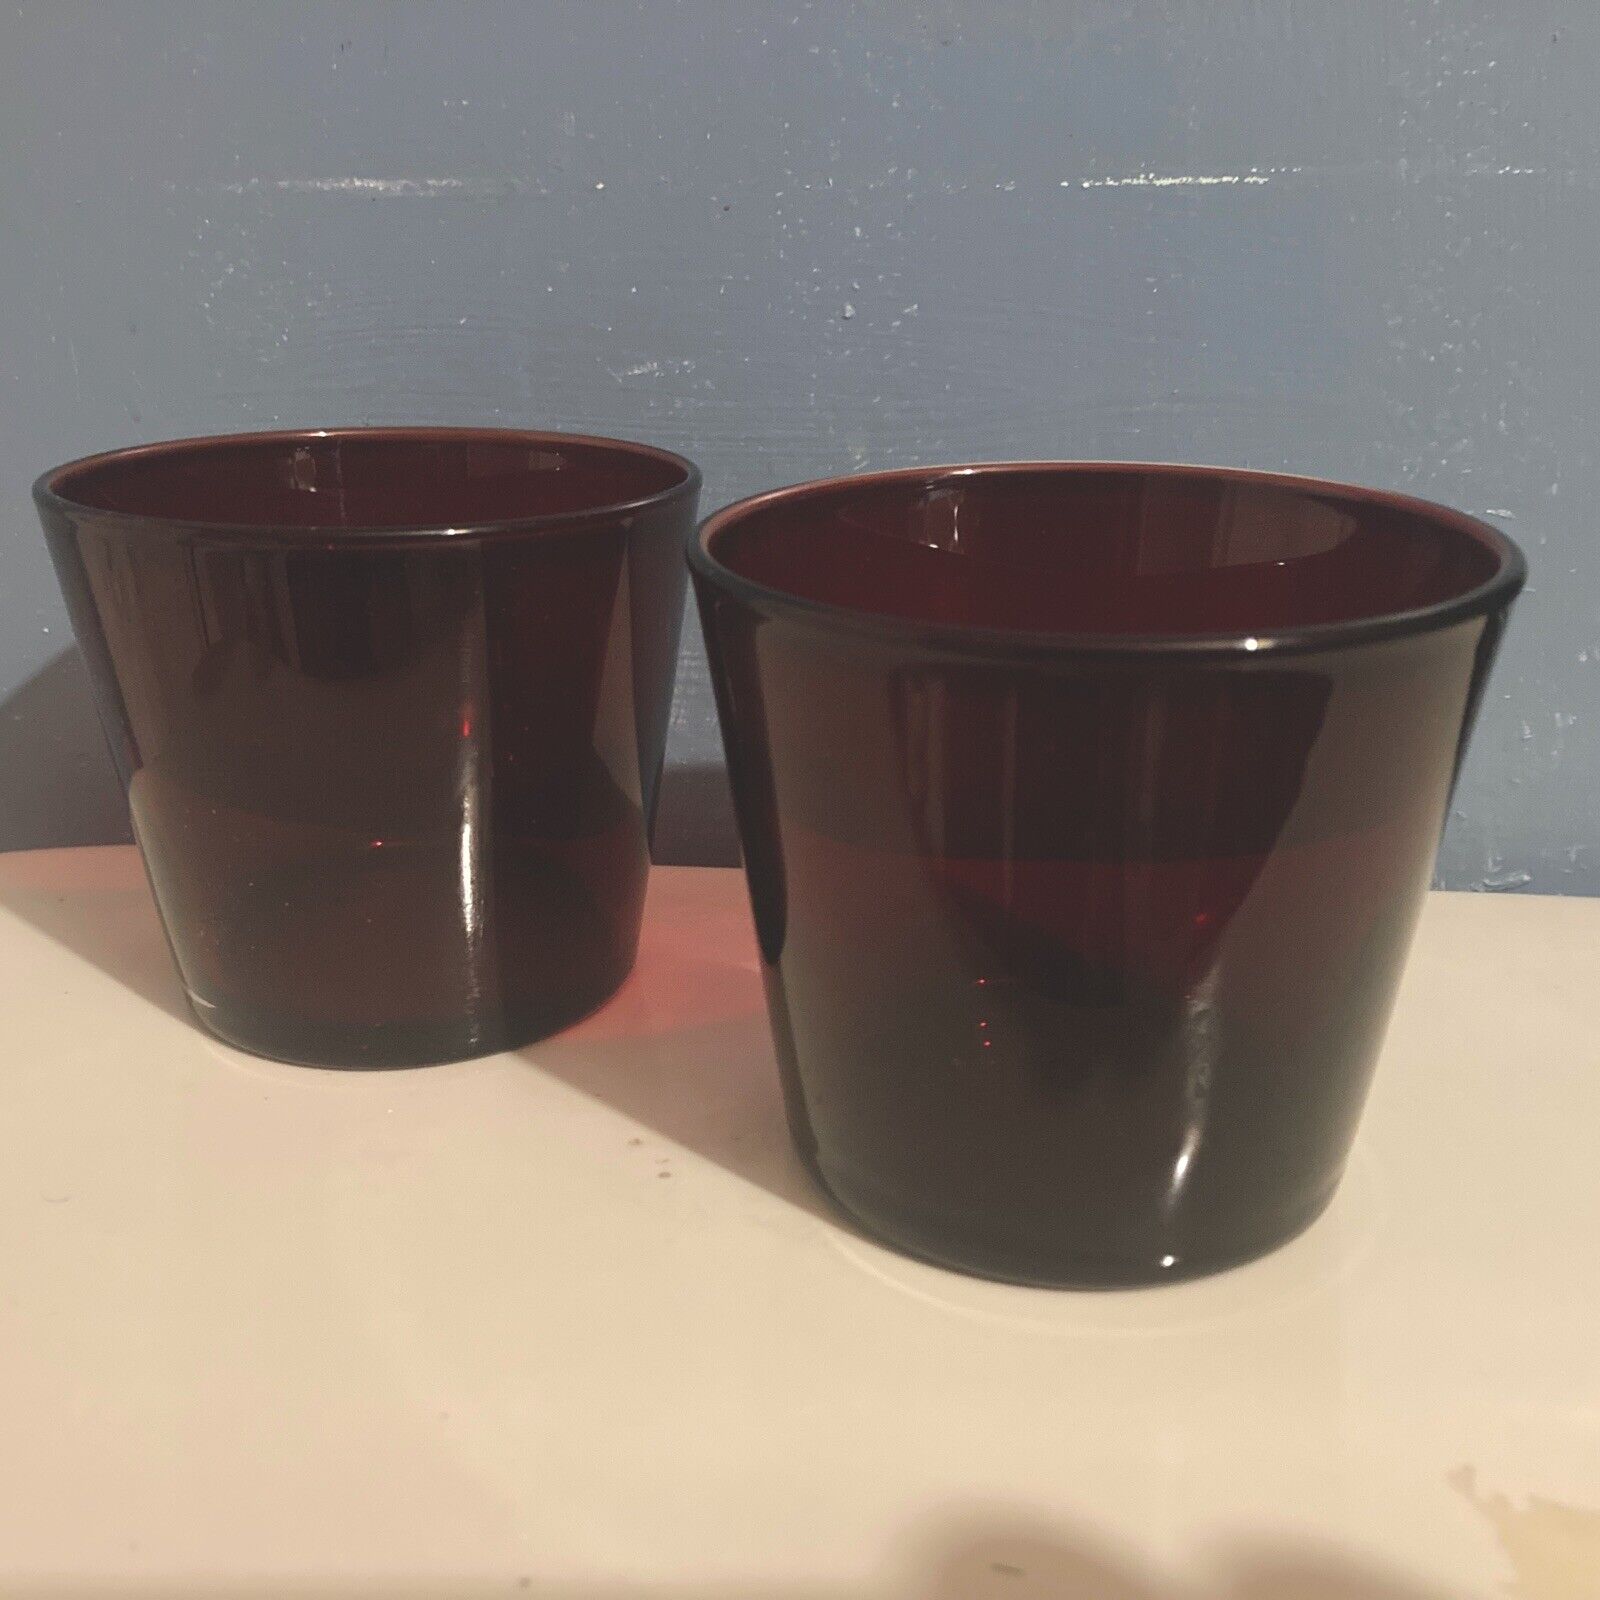 VTG Red Glass Tumblers MCM Drink ware